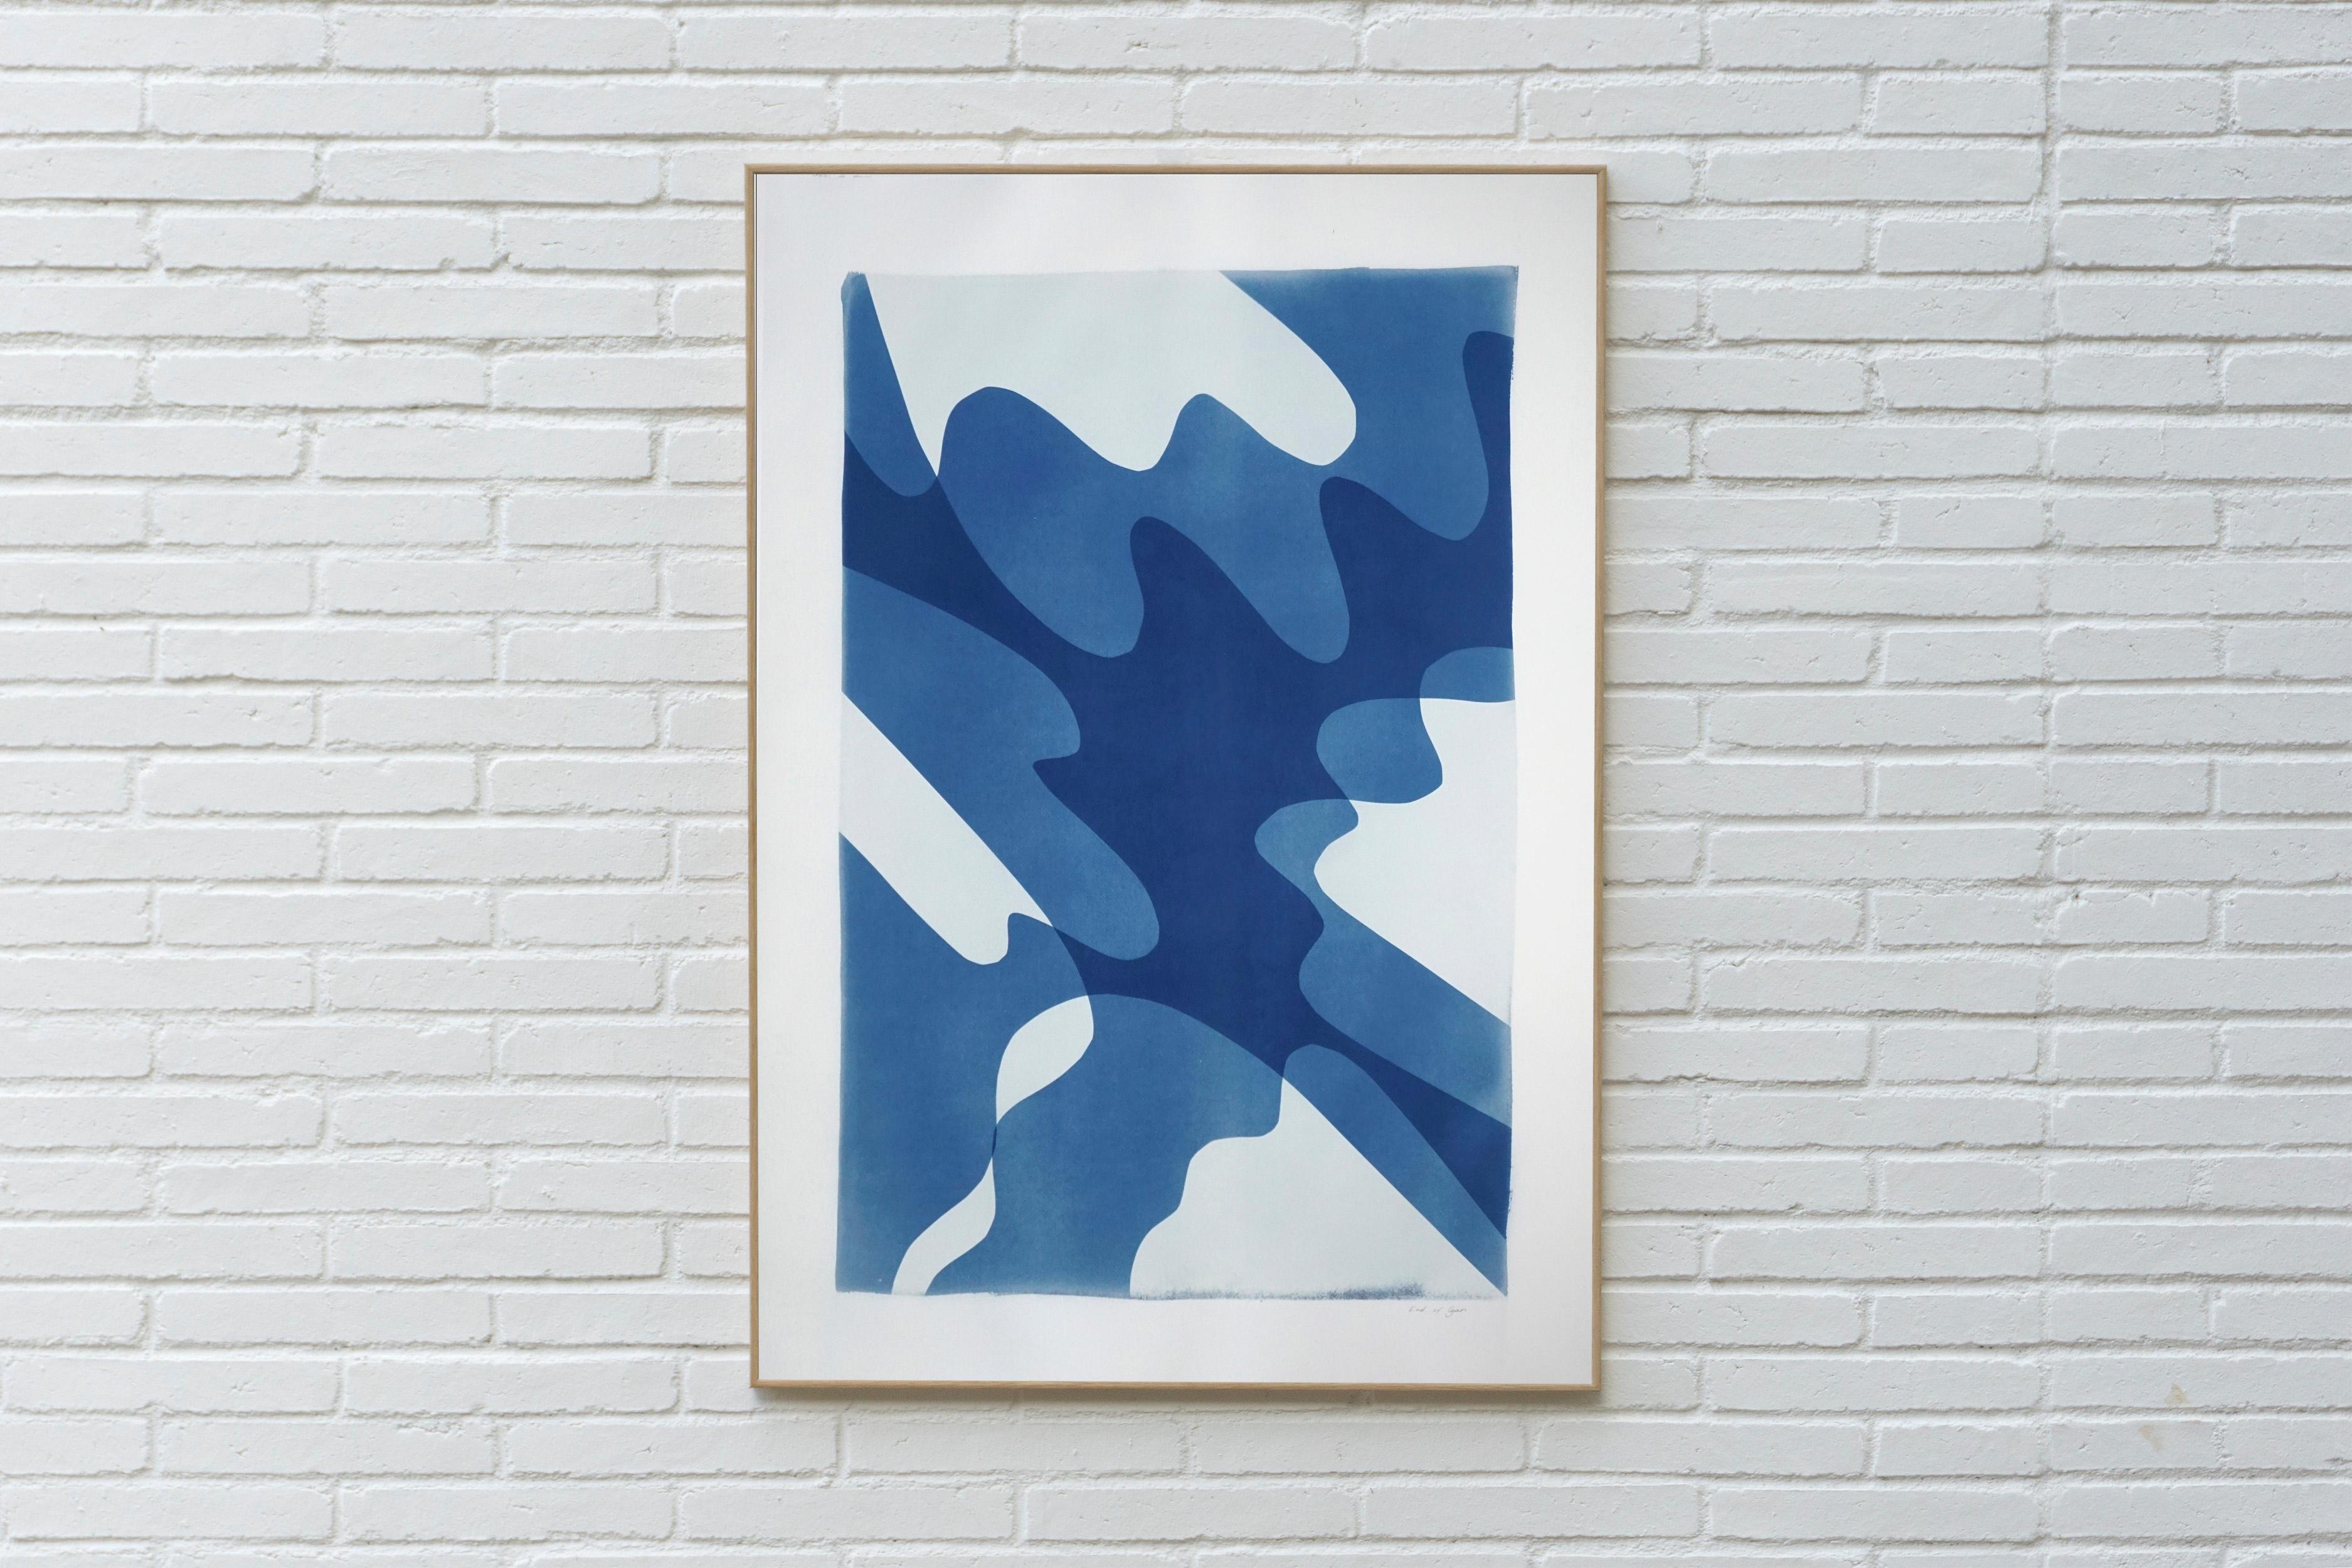 This is an exclusive handprinted unique cyanotype that takes its inspiration from the mid-century modern shapes.
It's made by layering paper cutouts and different exposures using uv-light. 

Details:
+ Title: Shaky Shadows
+ Year: 2021
+ Stamped and